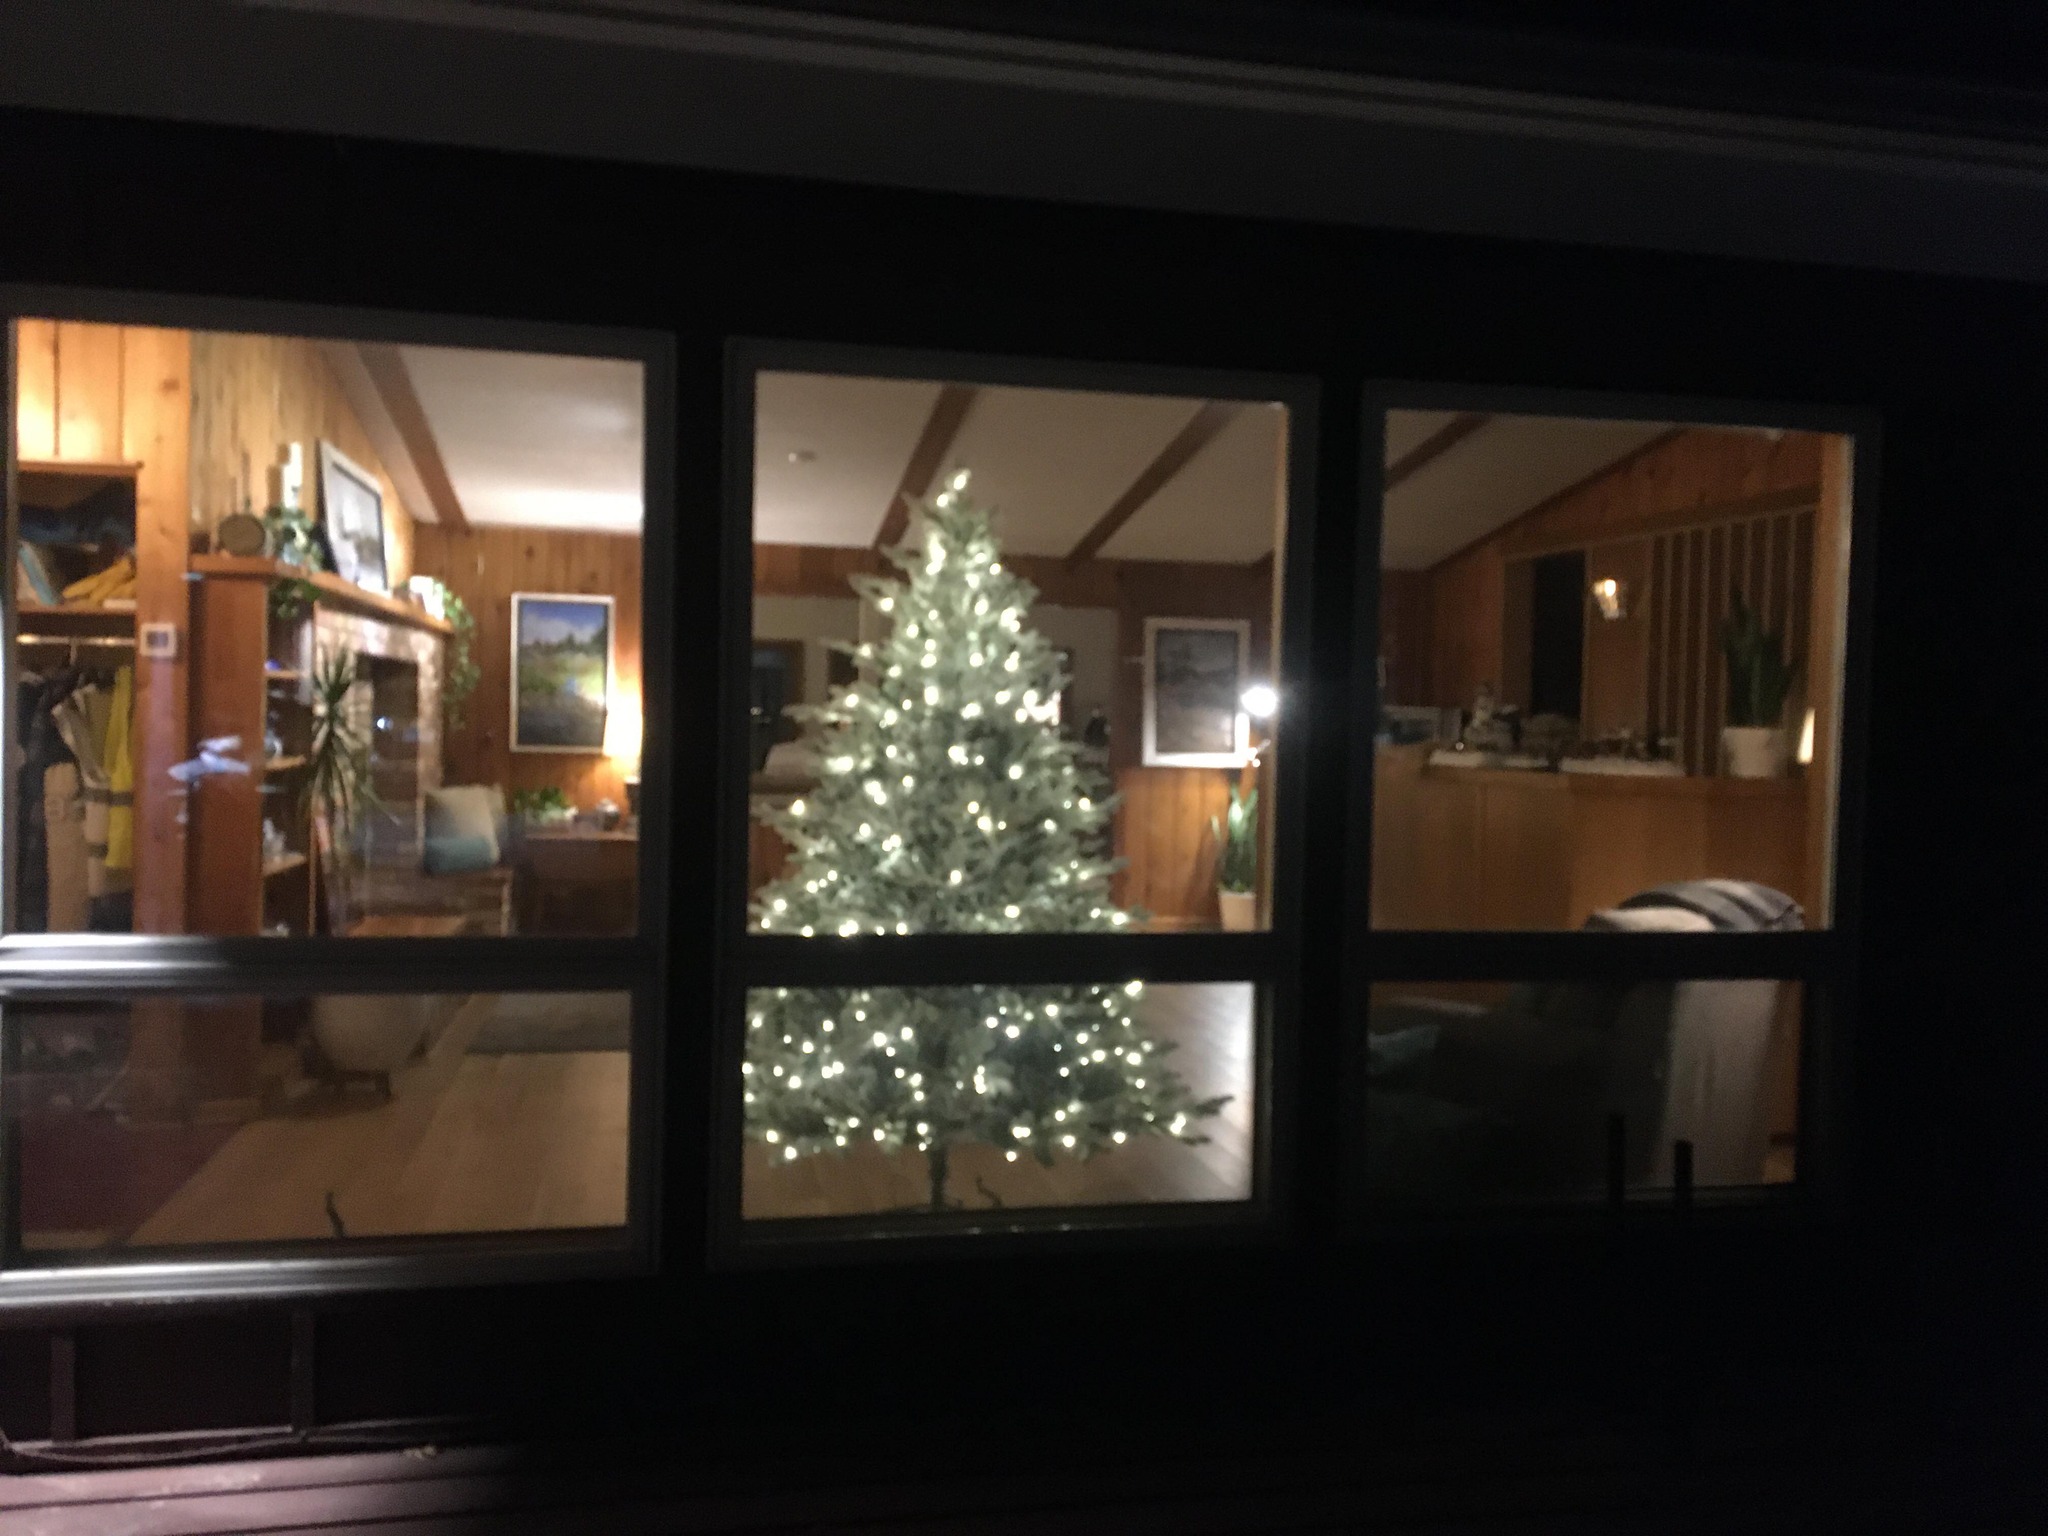 View of Keith Steven's Christmas tree from the window outside of his house.